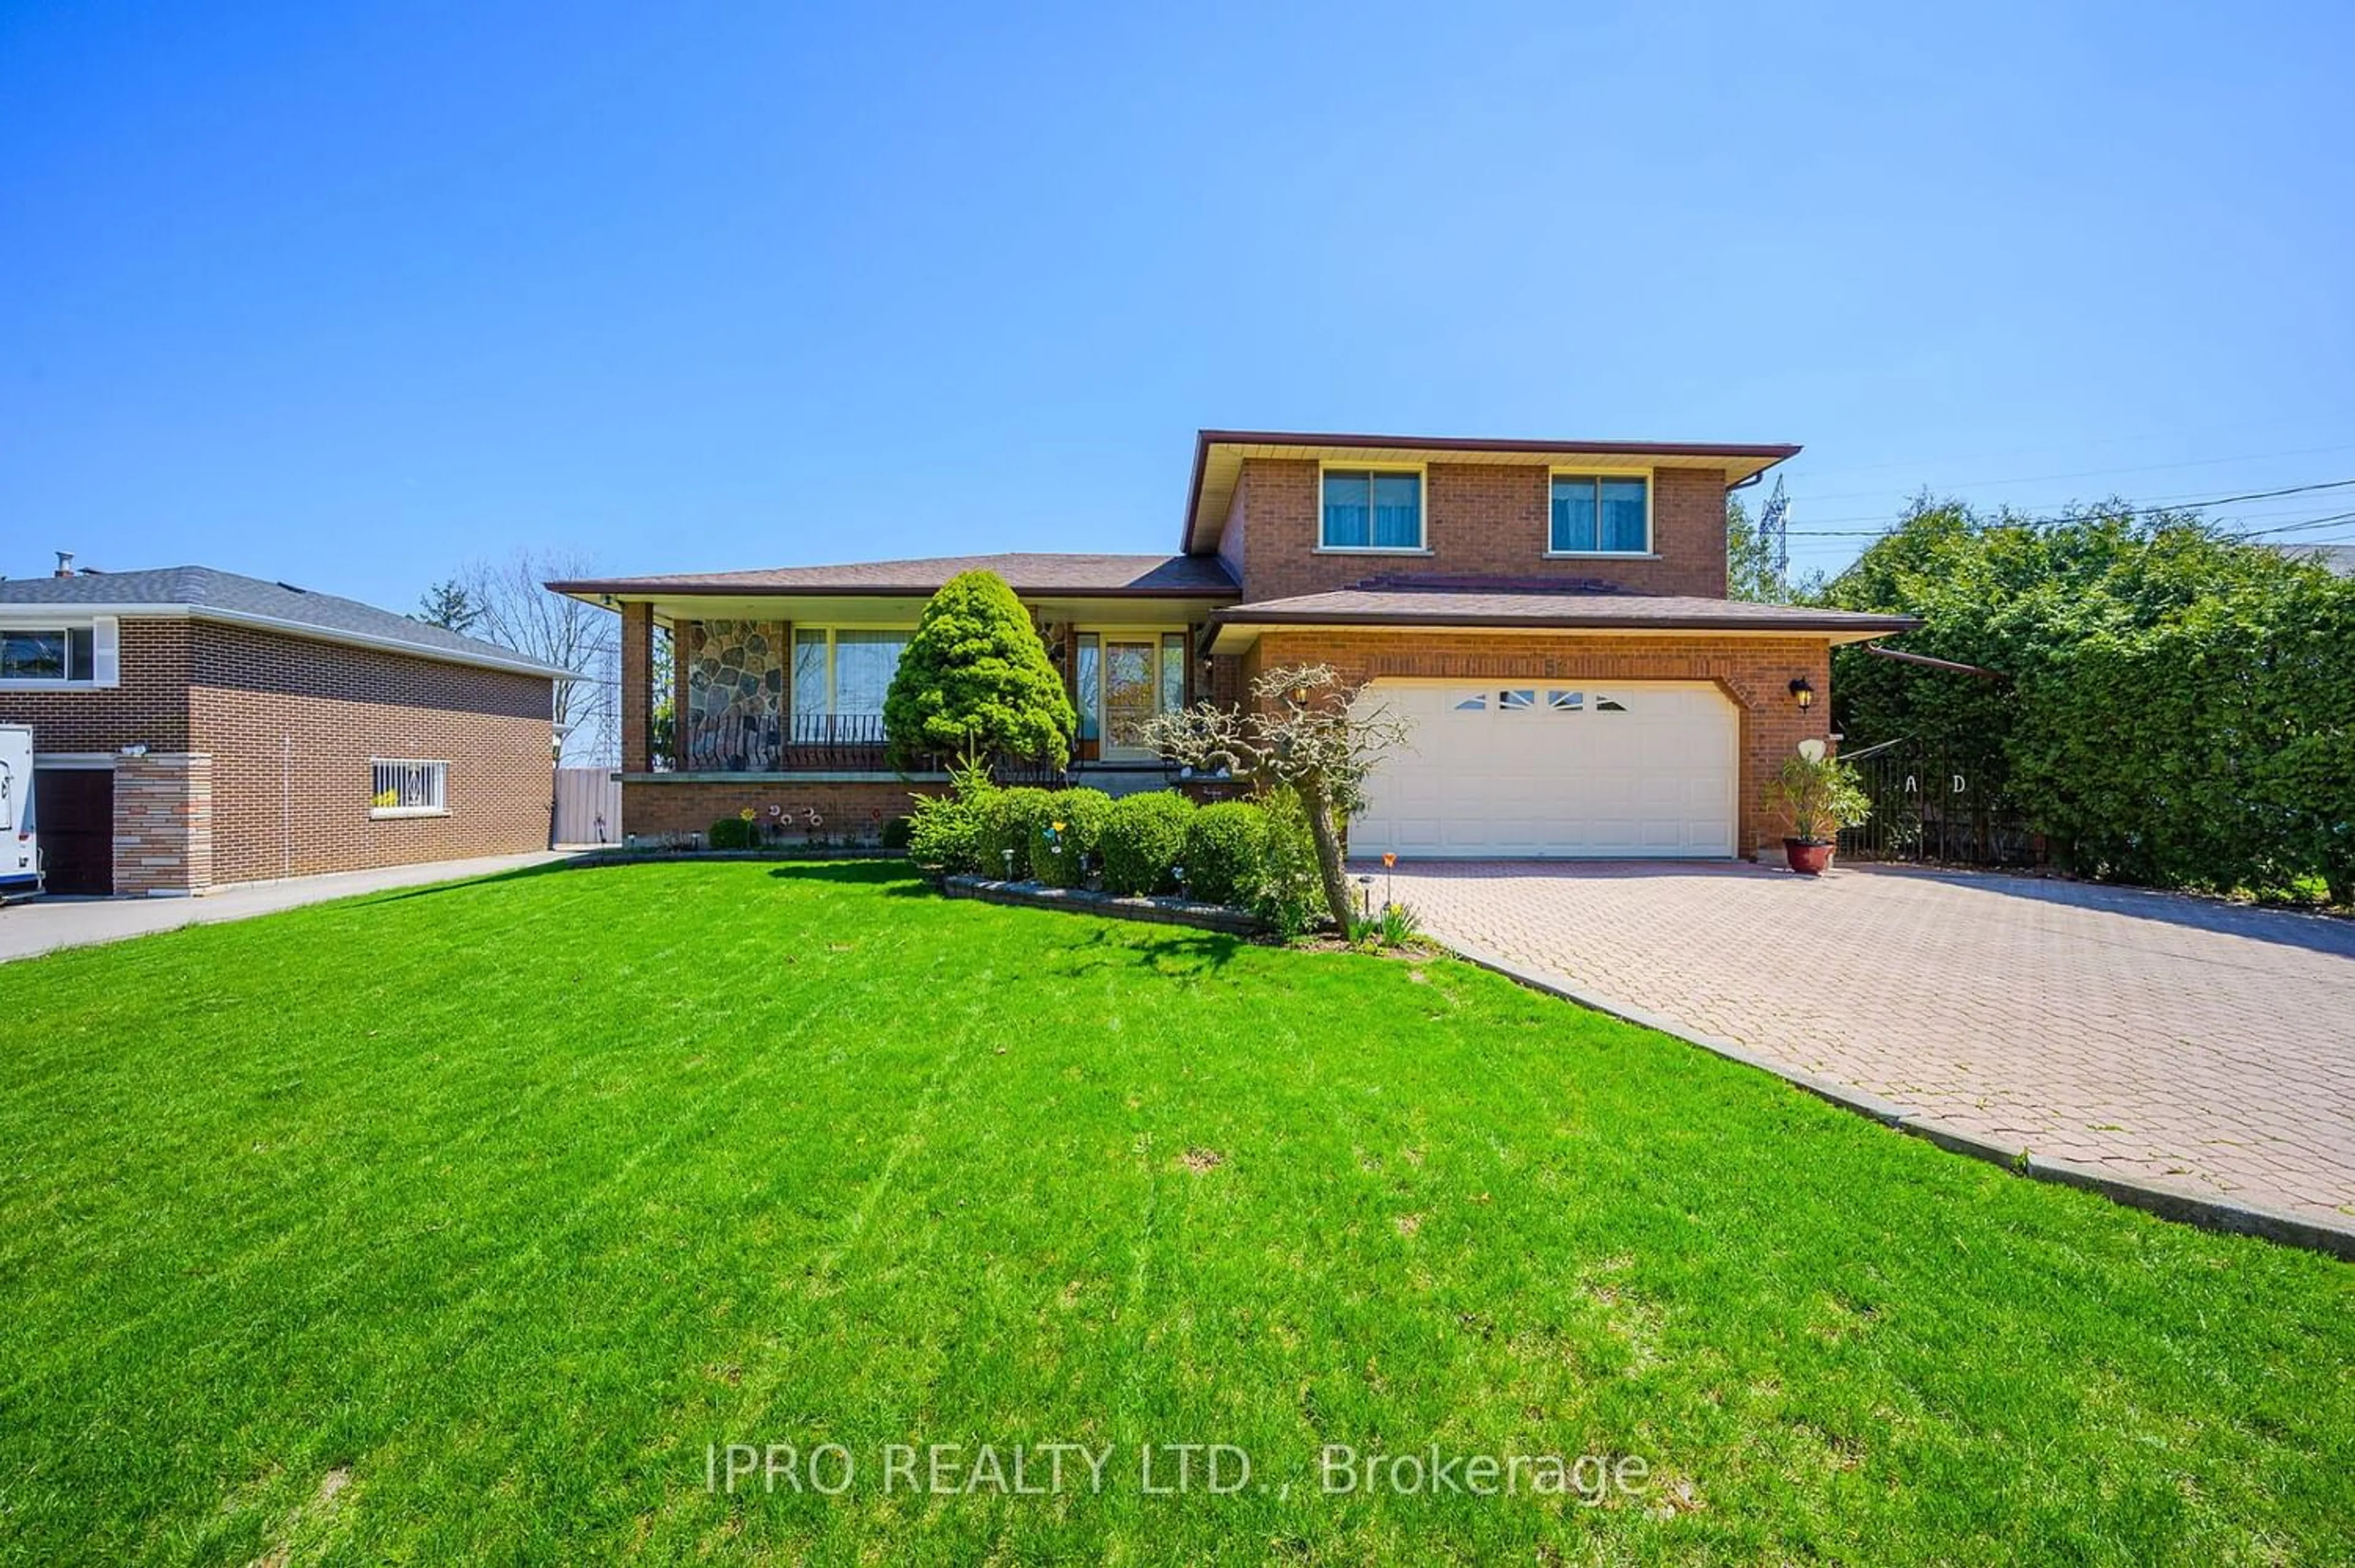 Frontside or backside of a home for 53 Glover Rd, Hamilton Ontario L8W 3S8